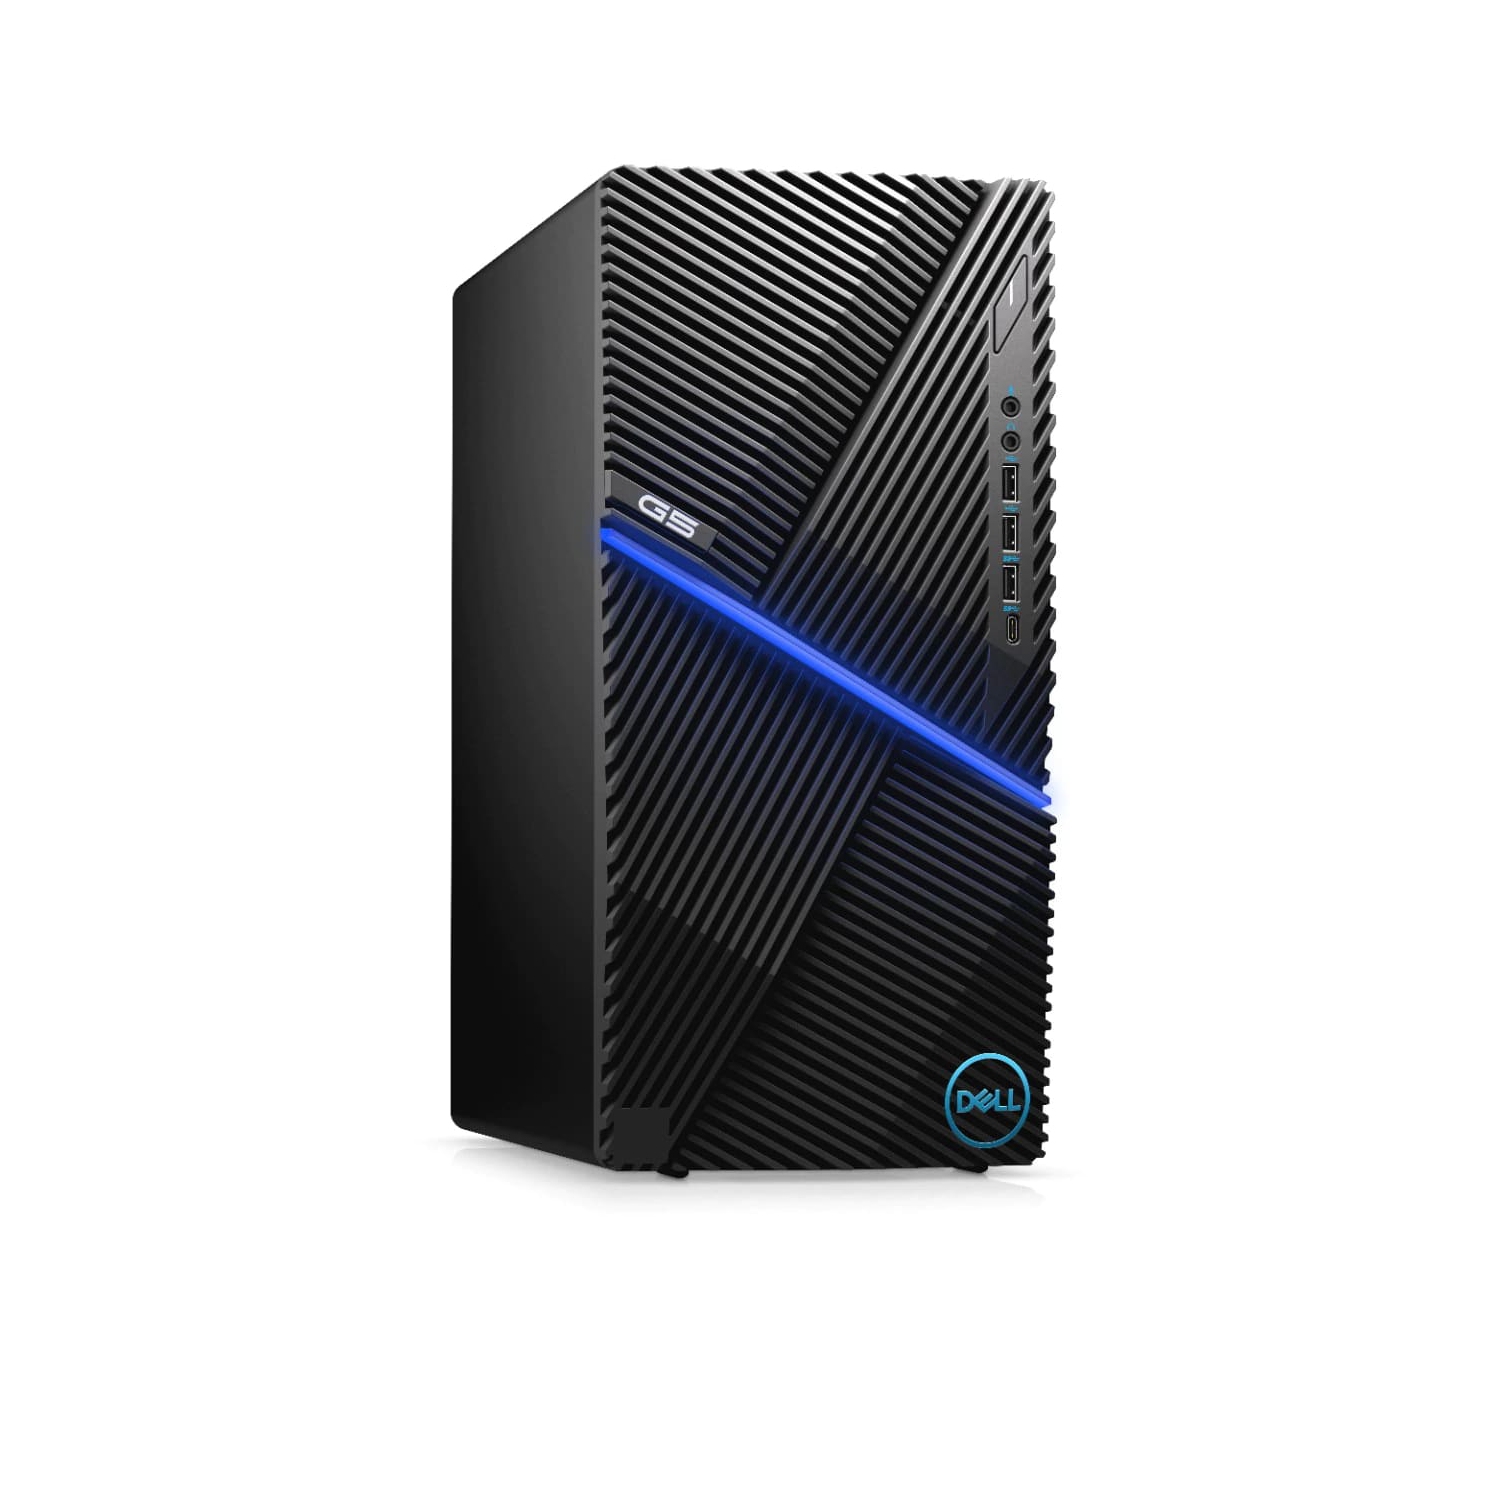 Refurbished (Excellent) - Dell G5 5000 Gaming Desktop (2020) | Core i7 - 2TB HDD + 1TB SSD - 32GB RAM - RTX 3070 | 8 Cores @ 5.1 GHz - 10th Gen CPU Certified Refurbished